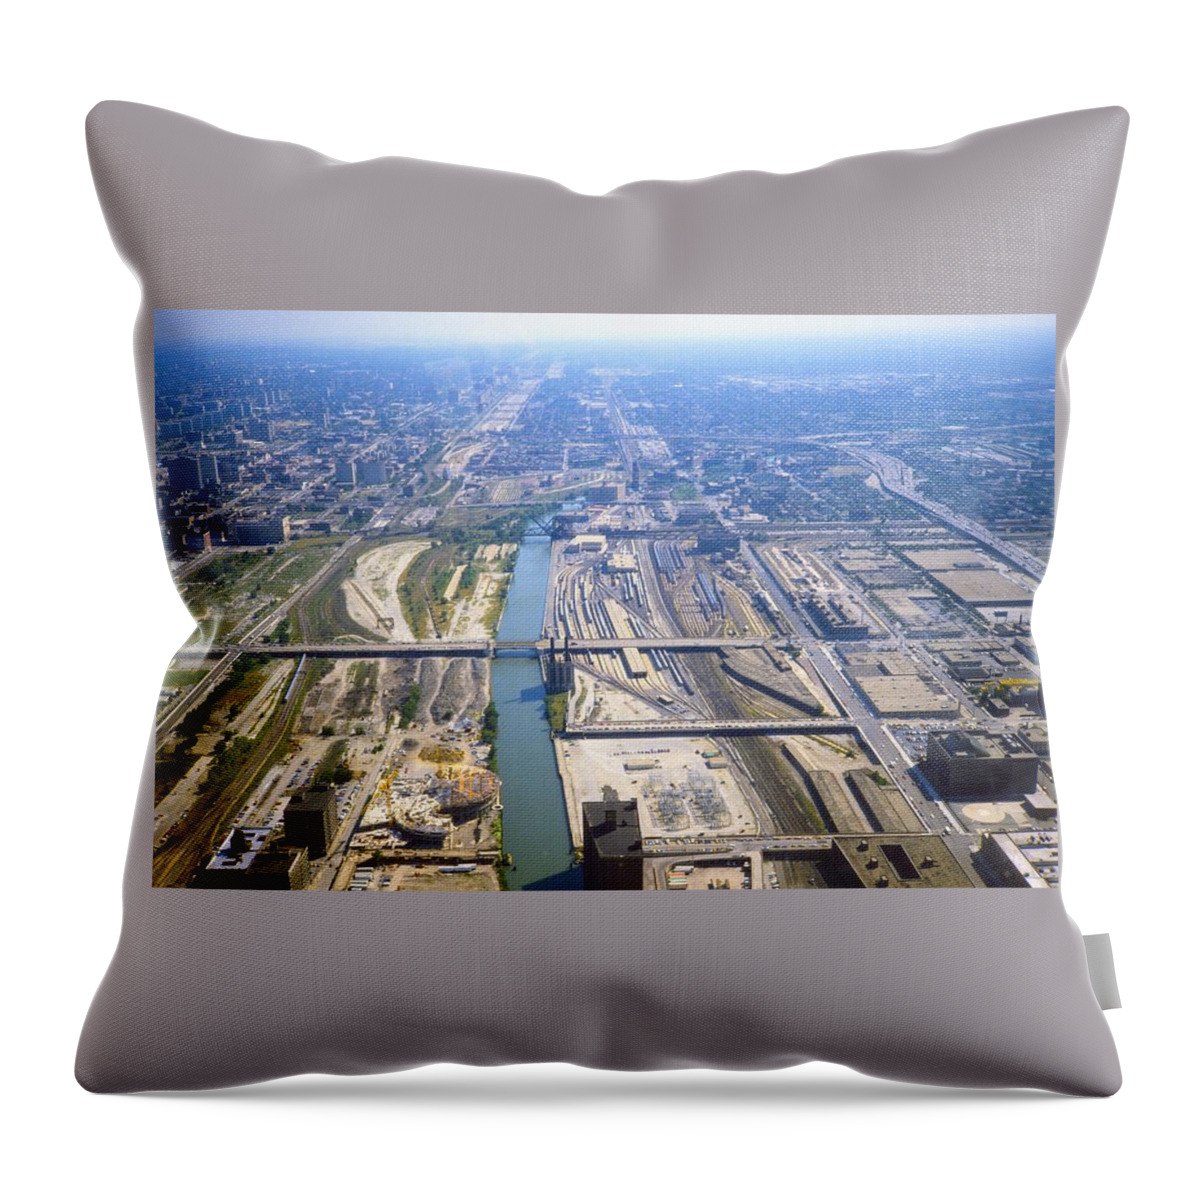  Throw Pillow featuring the photograph The Chicago Rail Freight Yards in 1984 by Gordon James